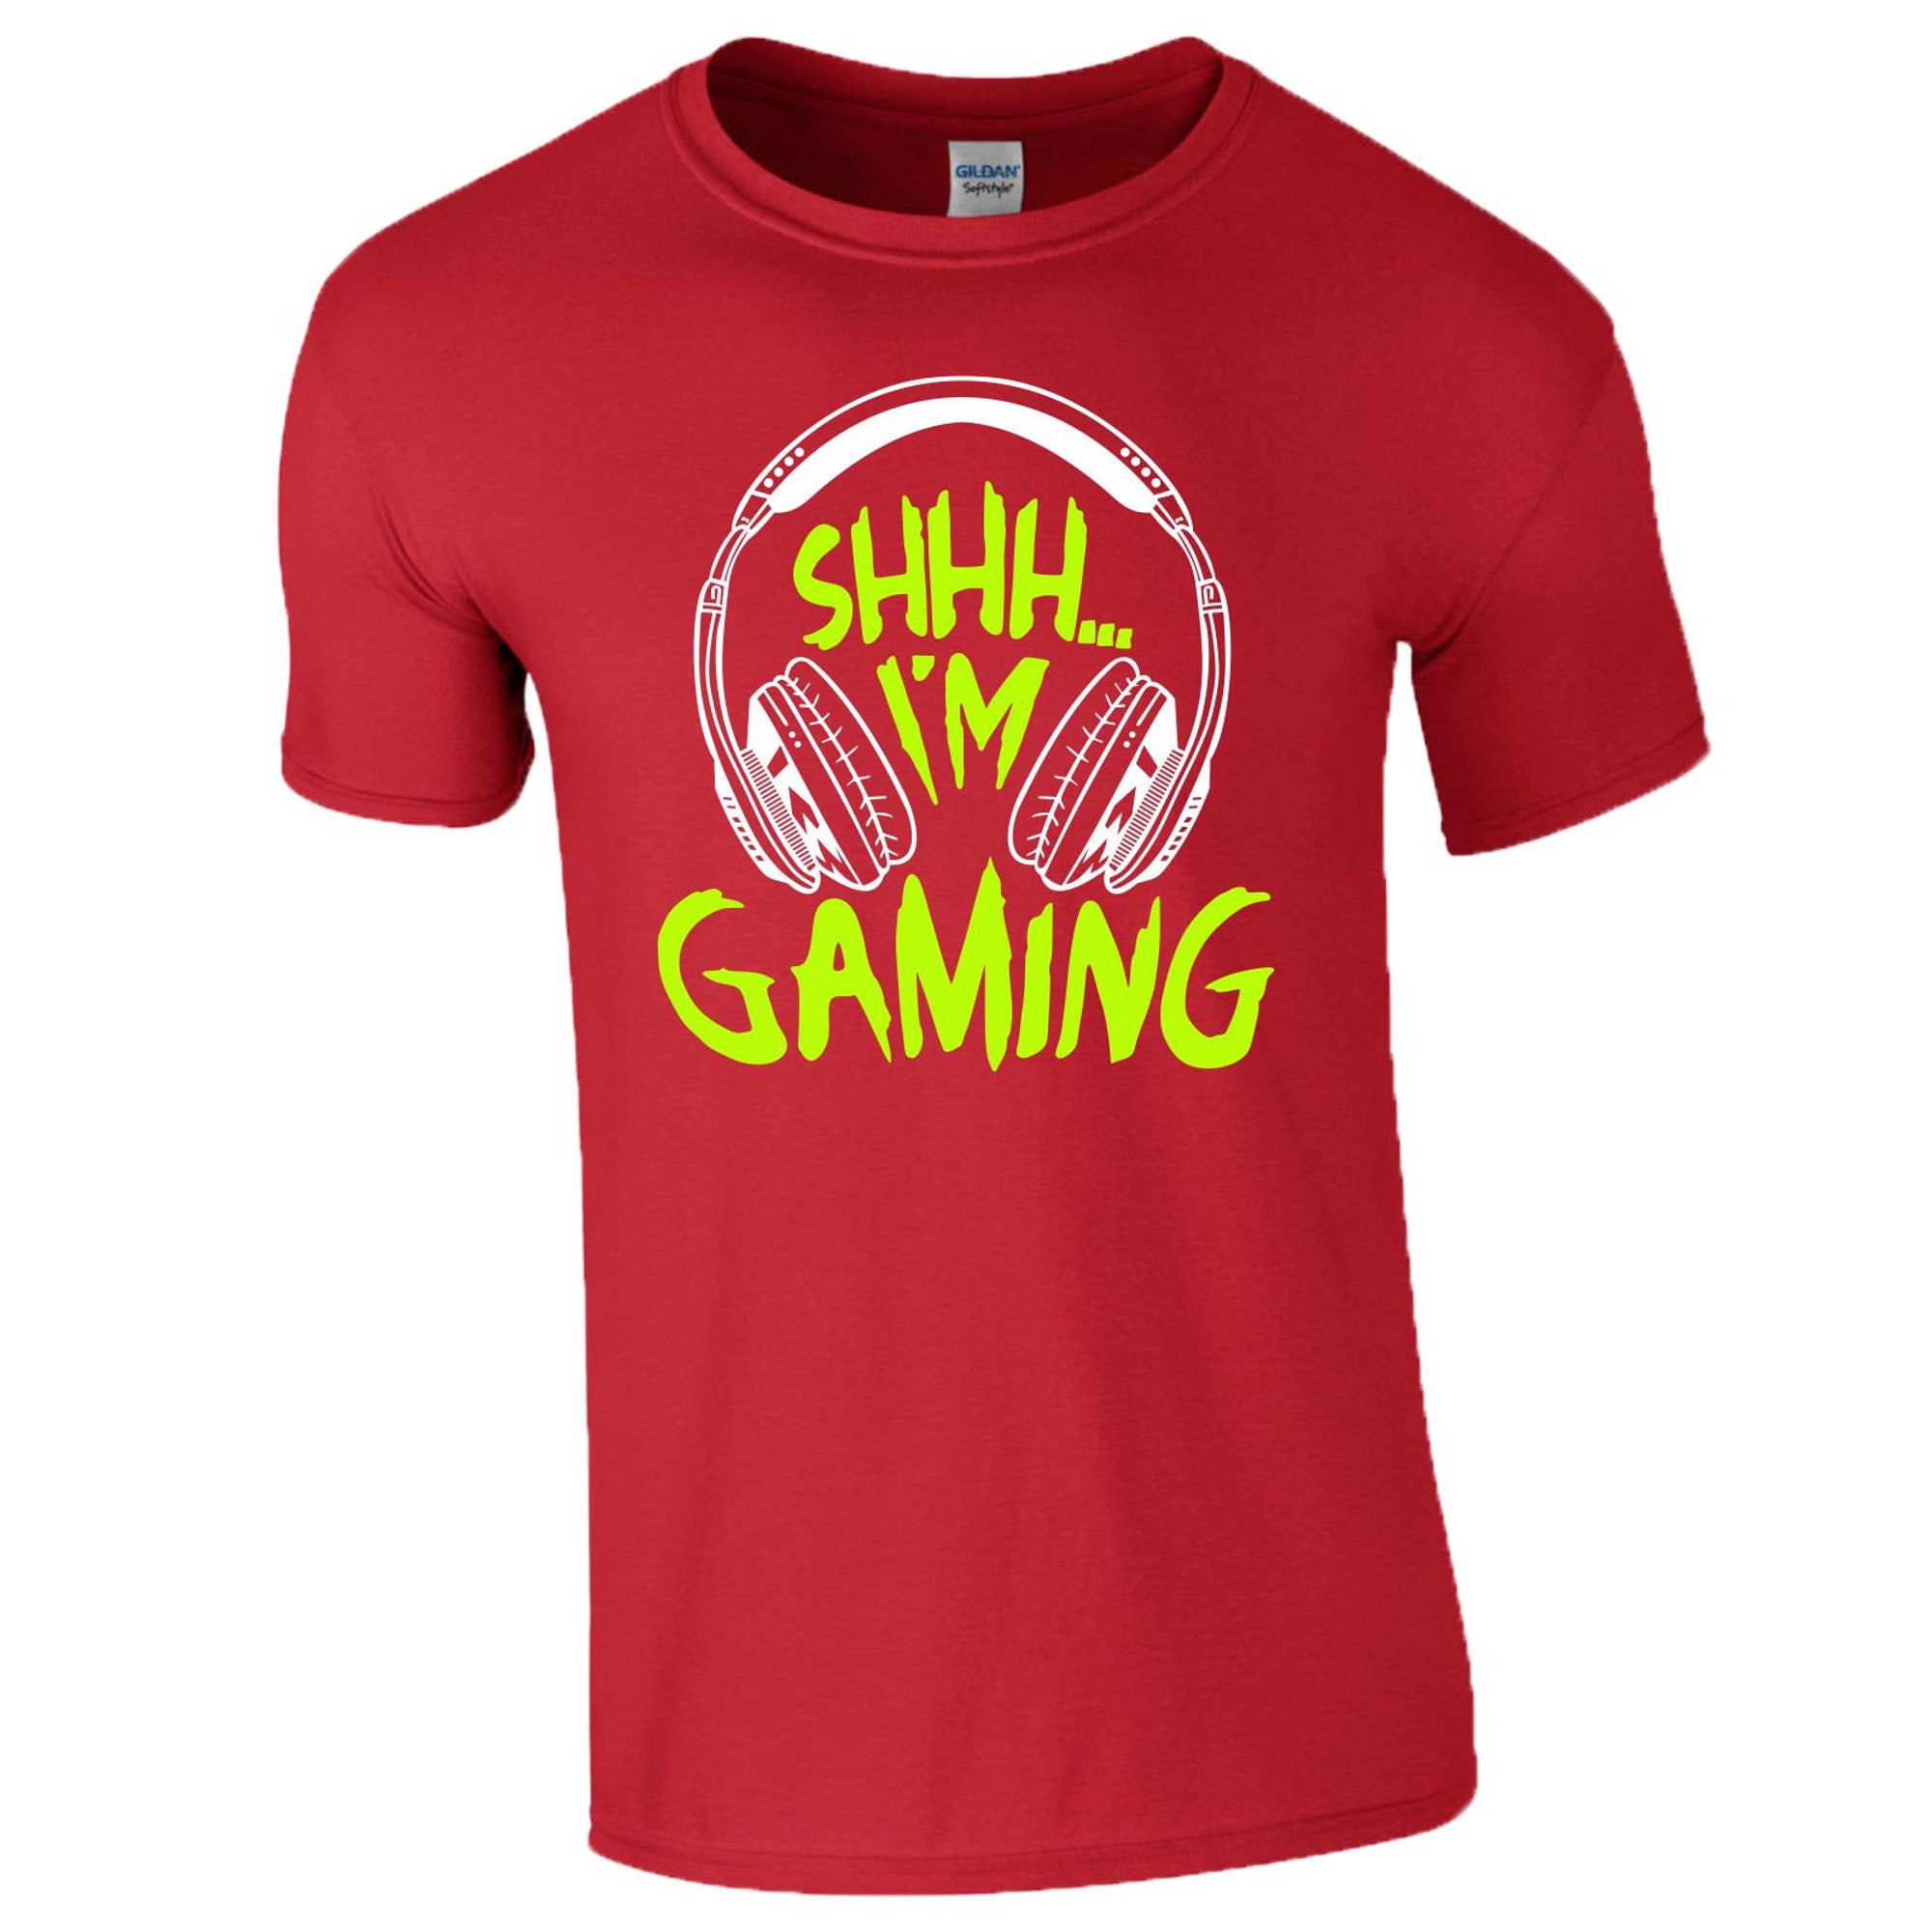 Discover Gamer T Shirt Shhh... I'm Gaming Funny Slogan Among US Game Festival Birthday Christmas Party Men Top Gift